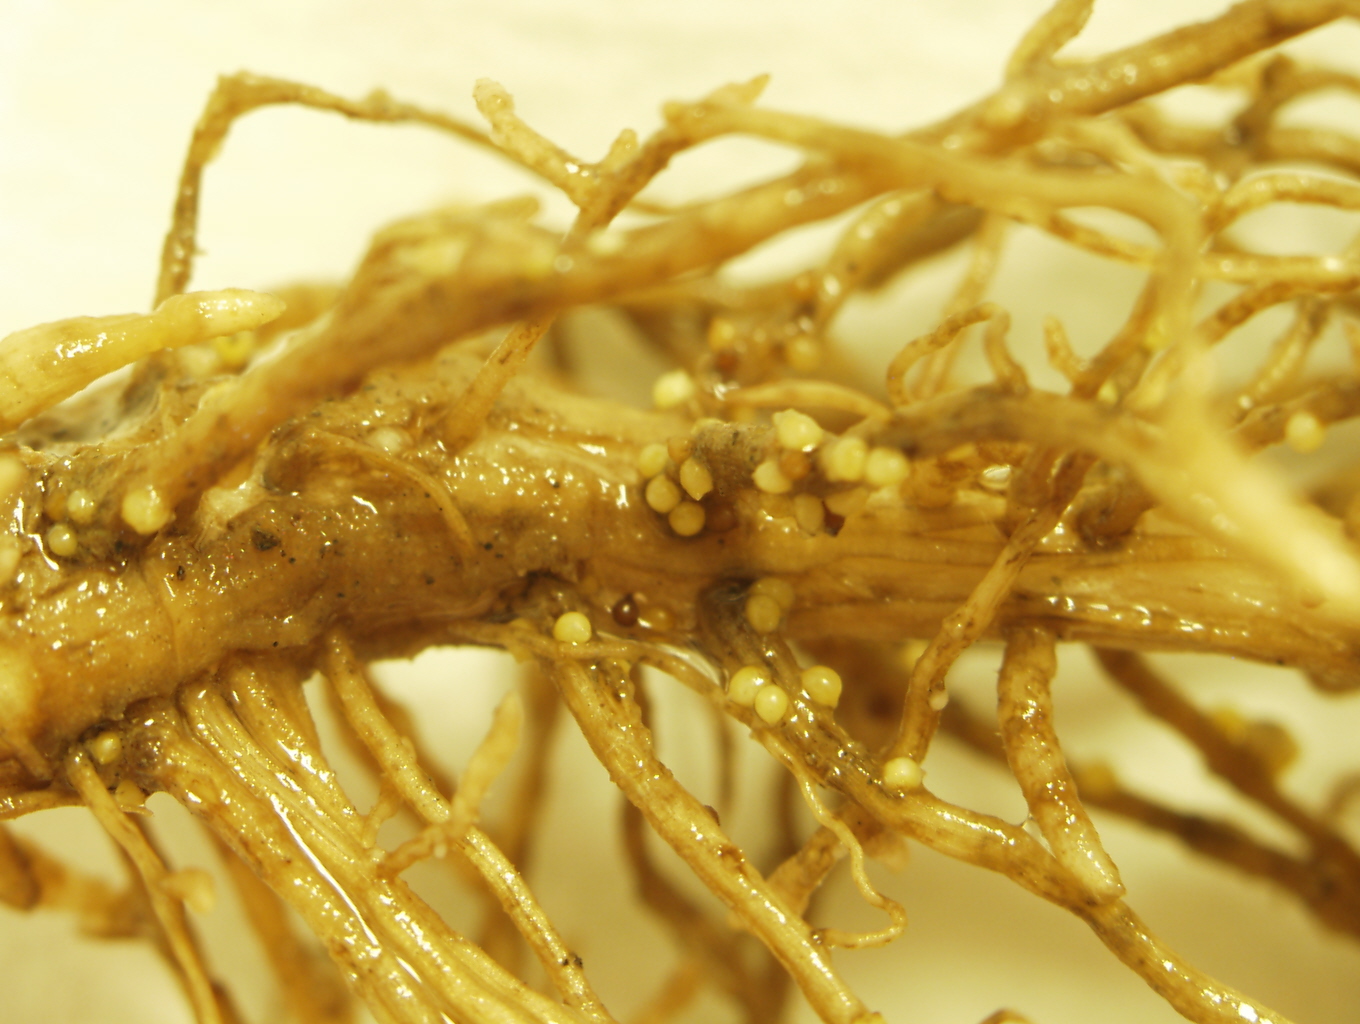 Test for soybean cyst nematode this fall